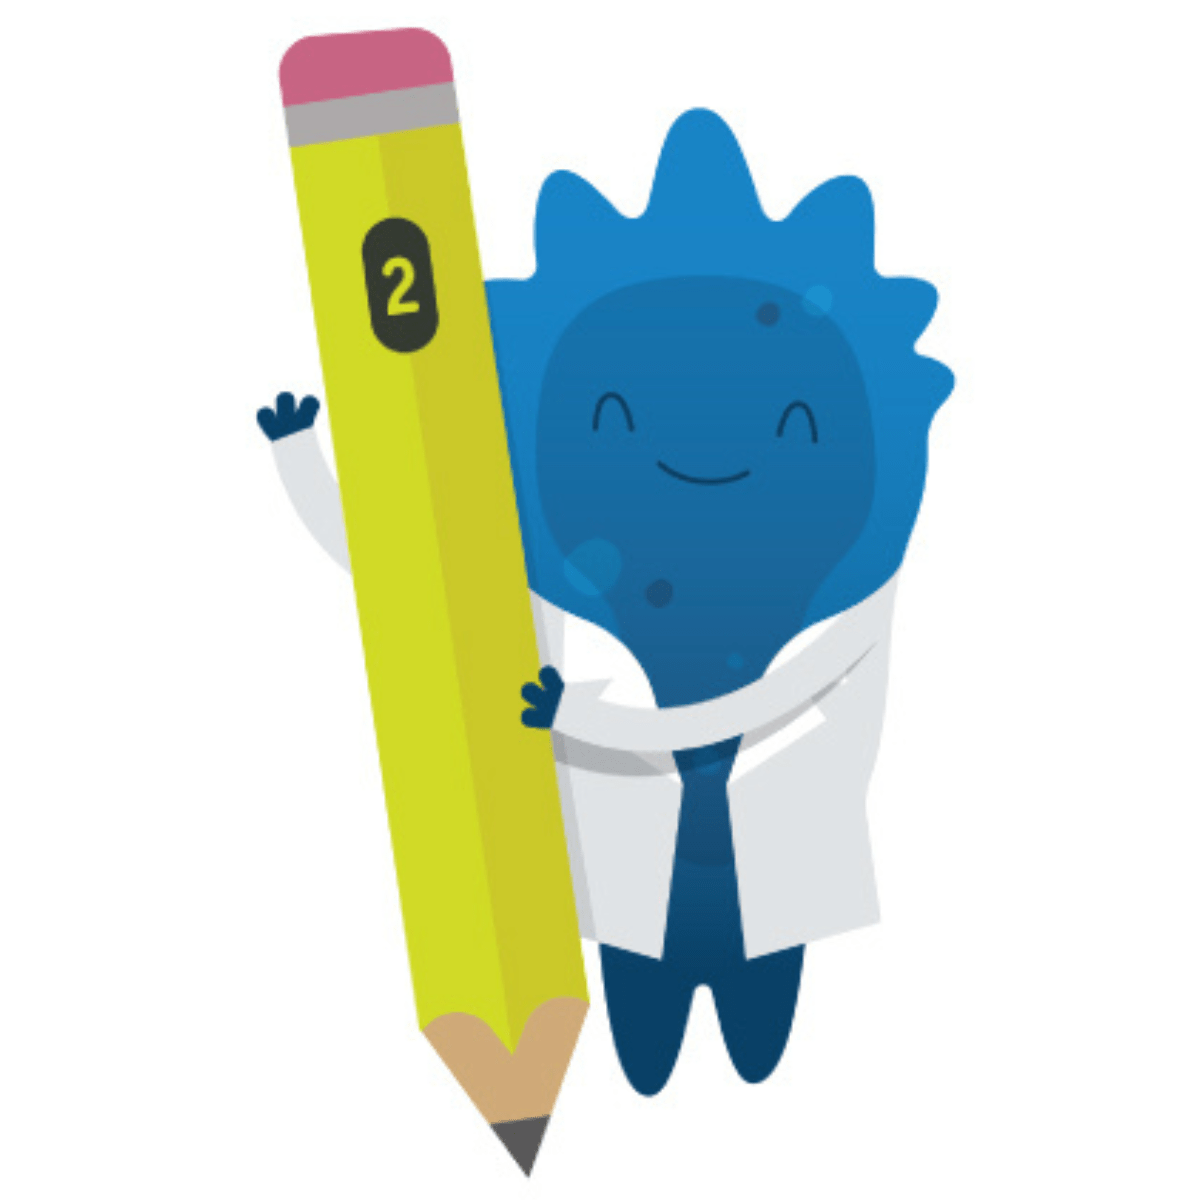 Blugene holding a pencil 